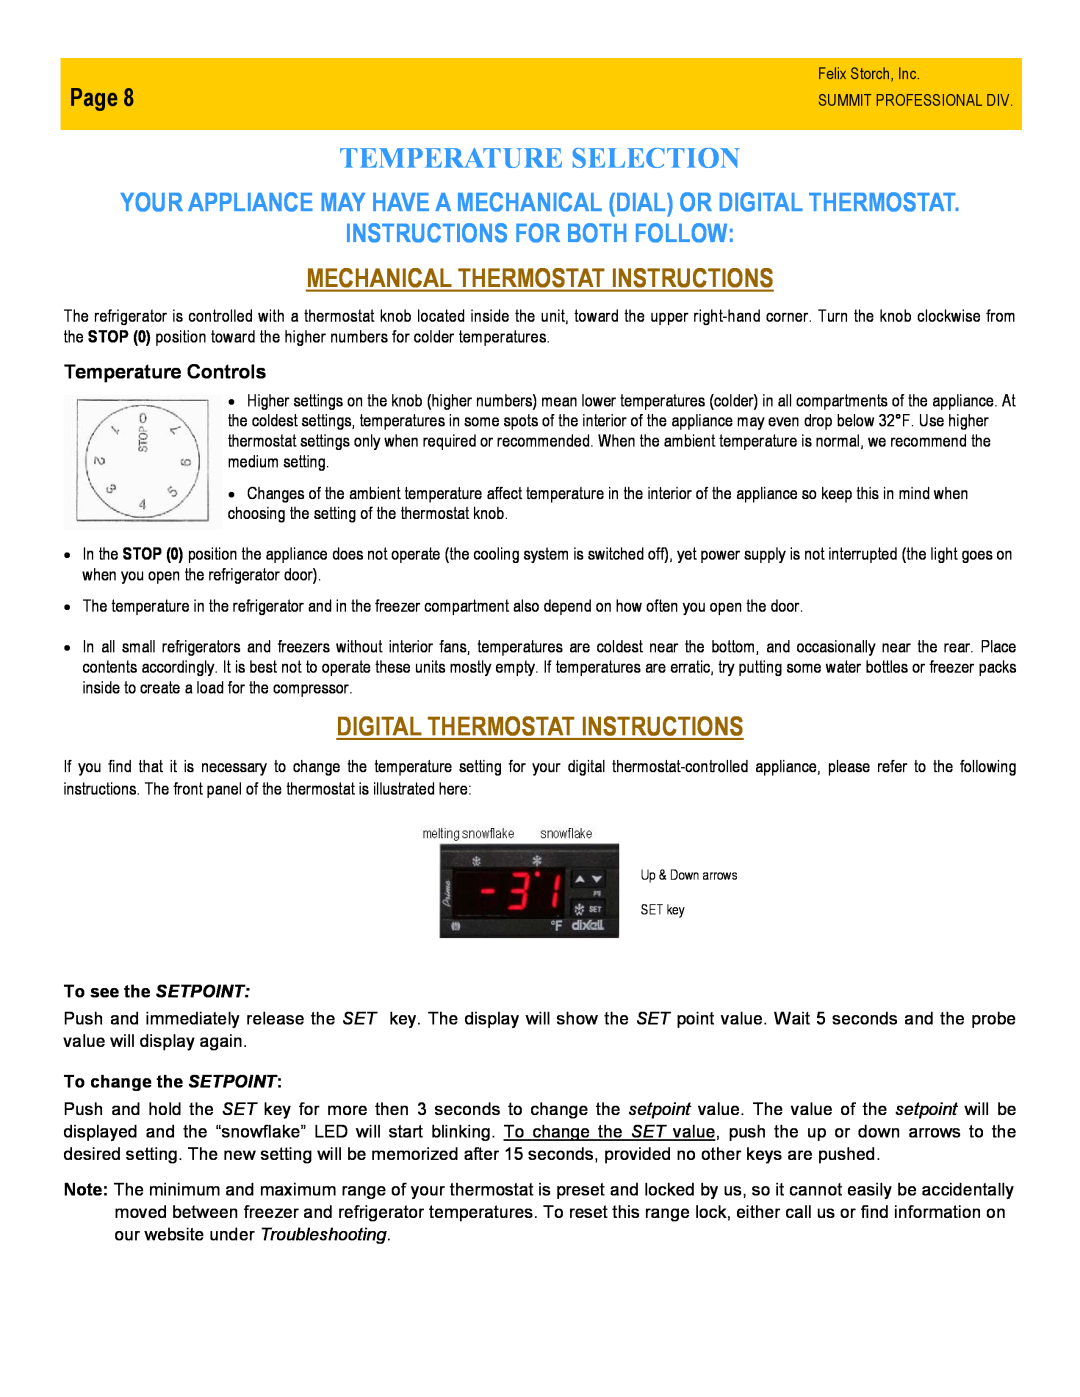 Summit FF7LBISSTB Temperature Selection, Instructions For Both Follow, Mechanical Thermostat Instructions, Page 